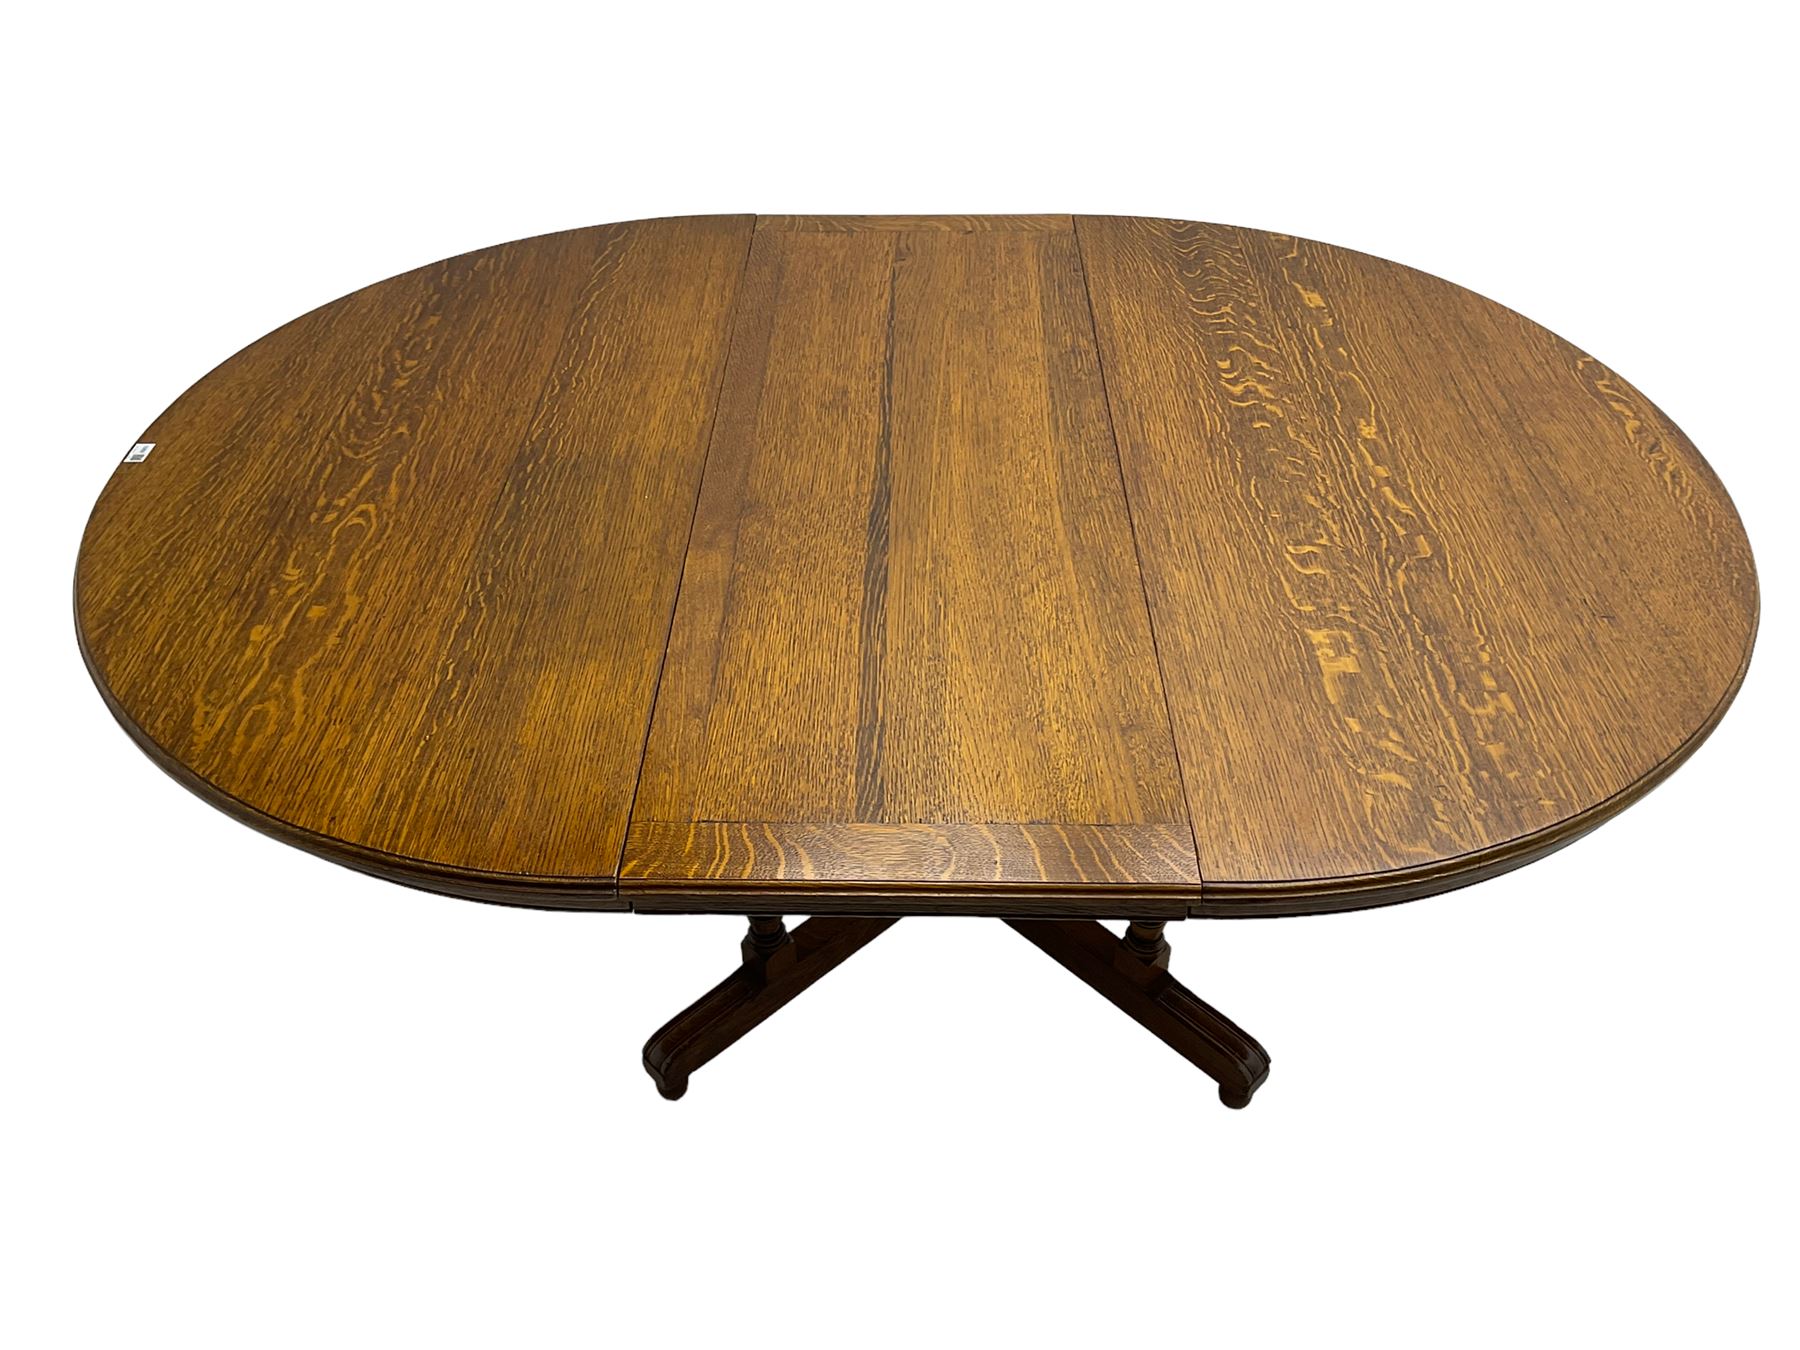 Early 20th century oak dining table - Image 4 of 8